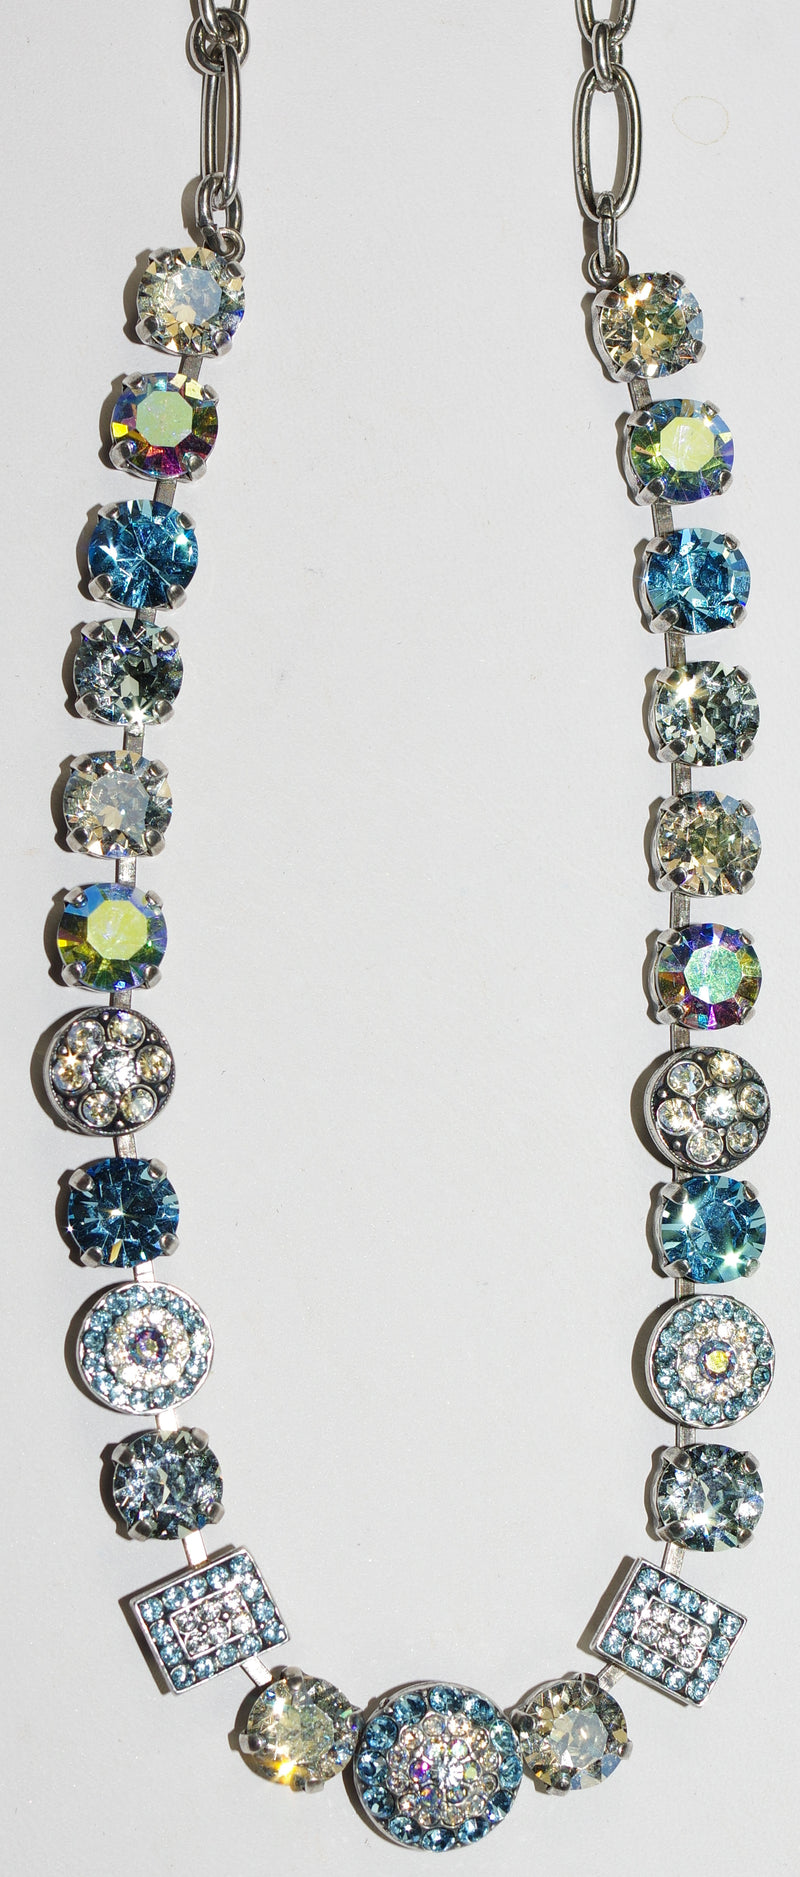 MARIANA NECKLACE ITALIAN ICE: clear, blue stones in silver rhodium setting, 18" adjustable chain